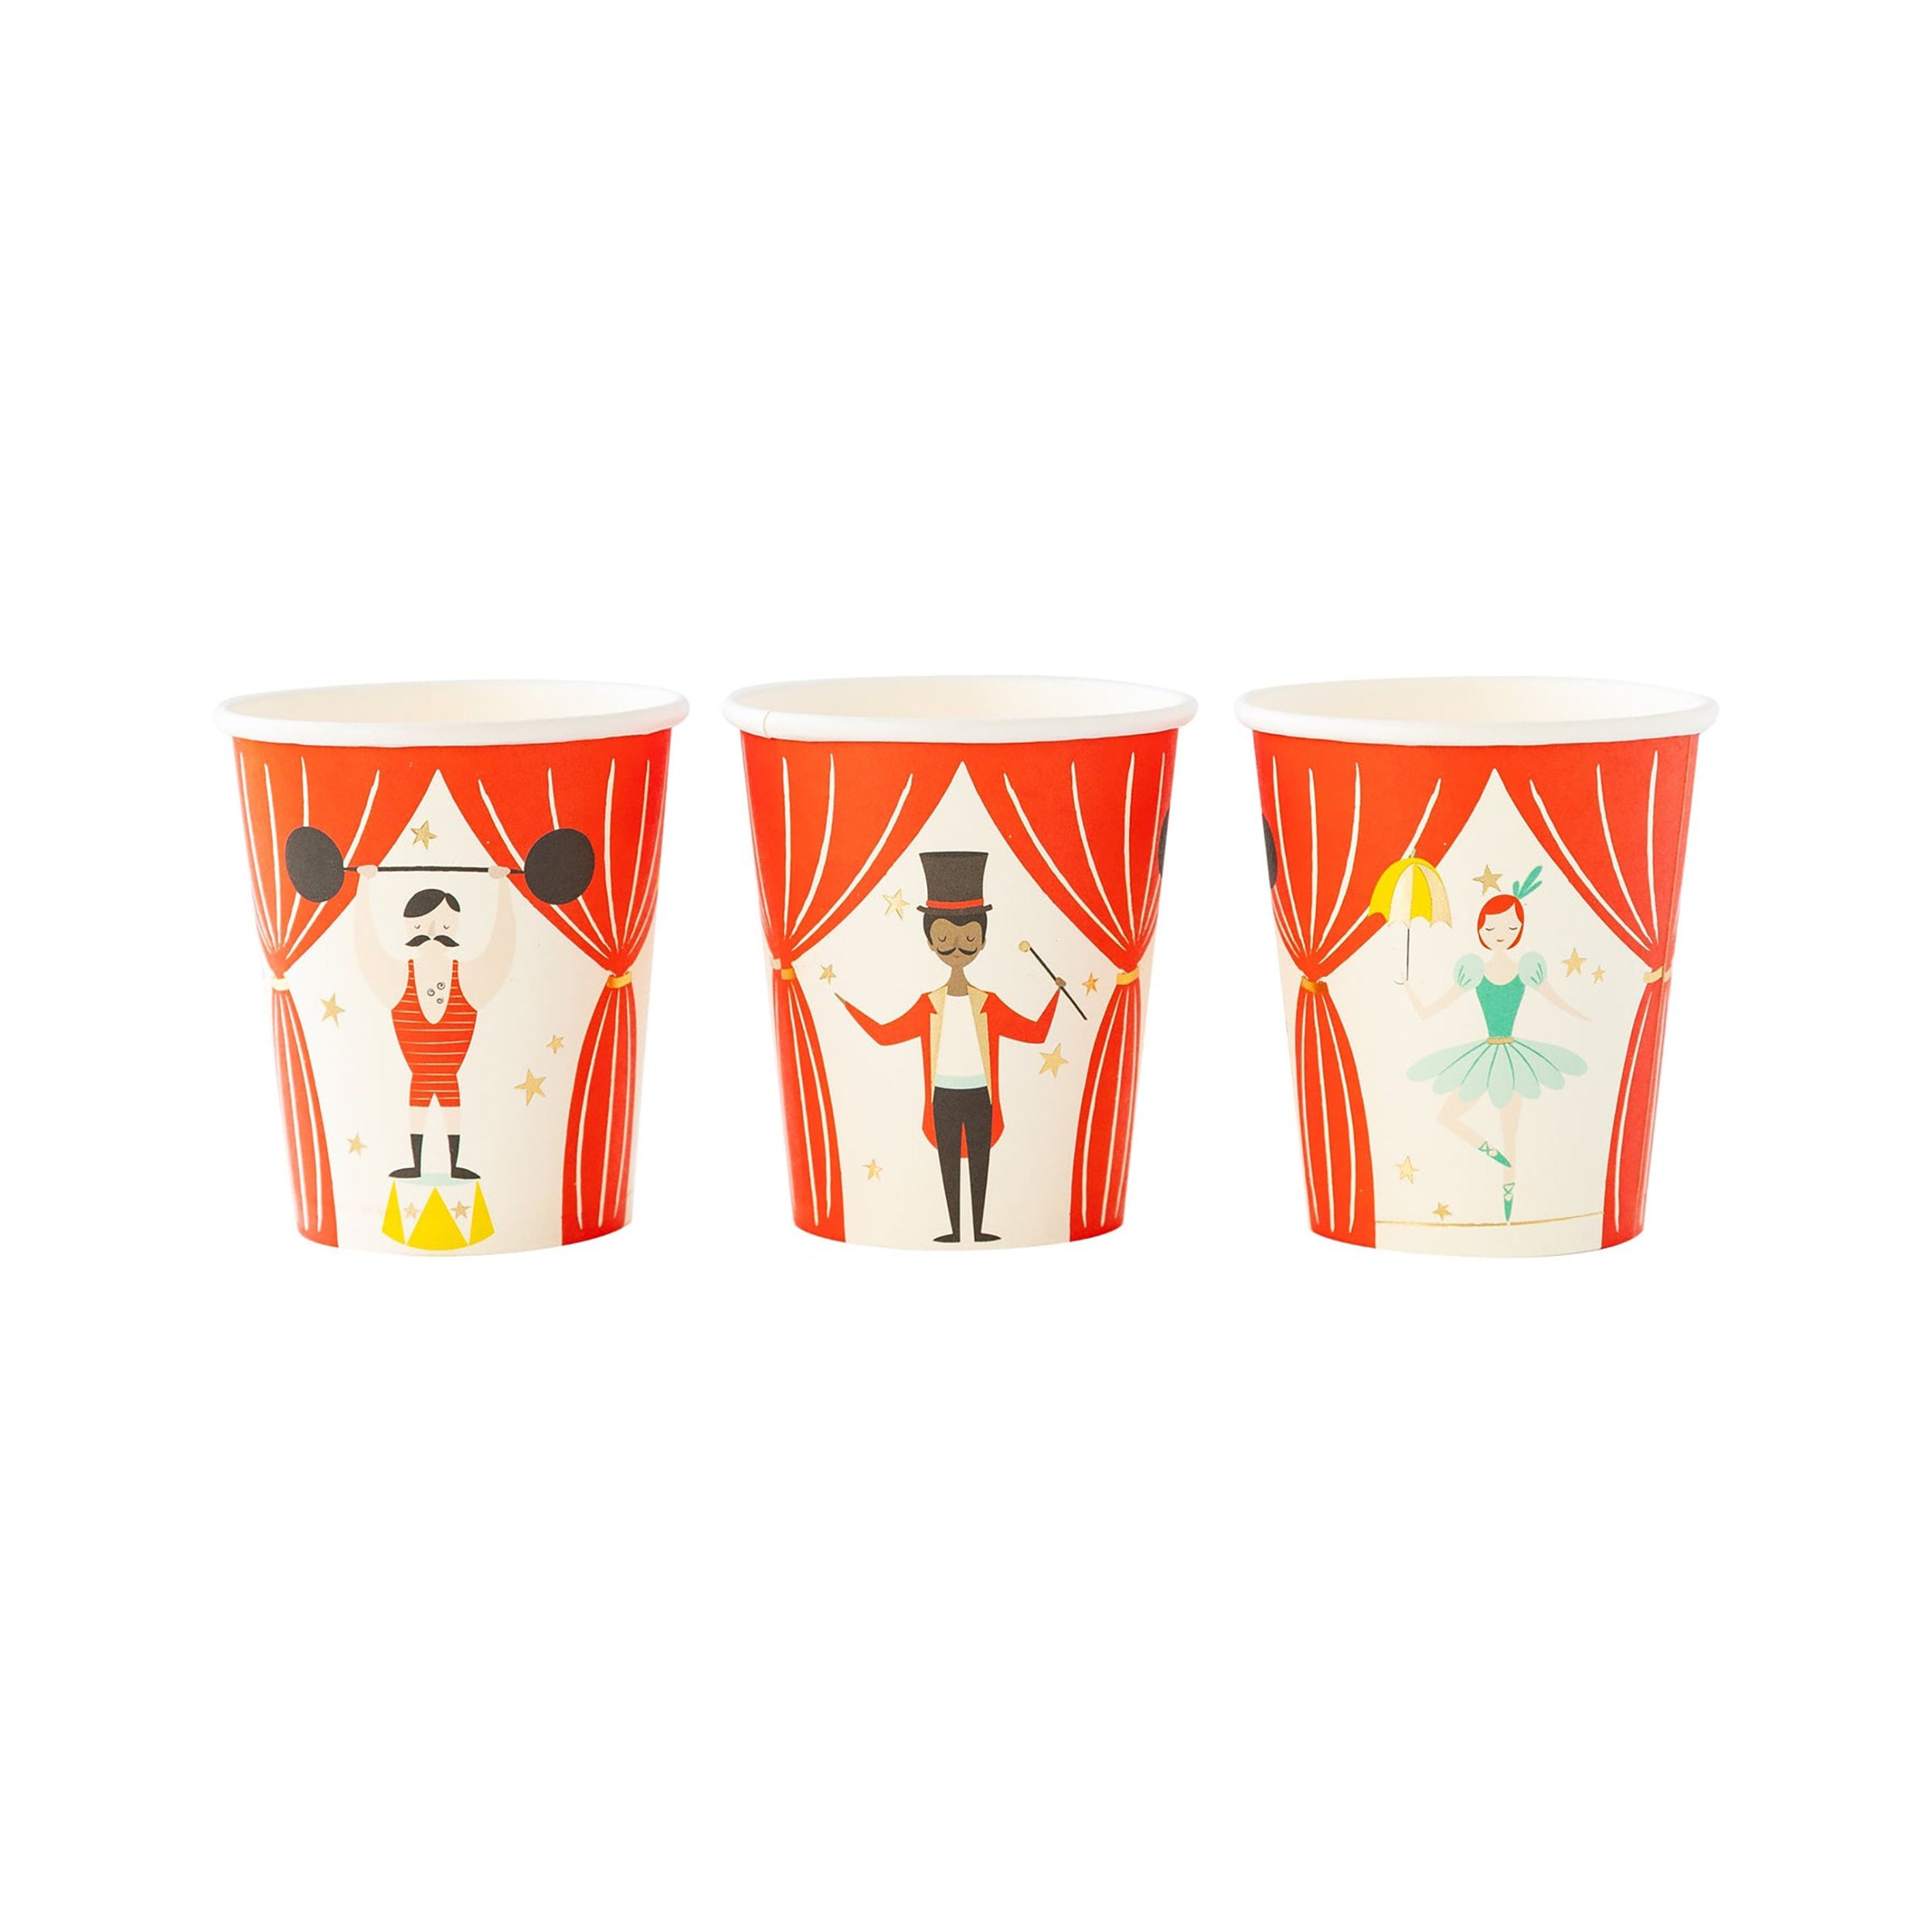 Carnival Cups | Circus Cups - Circus Baby Shower - Circus Birthday Party - Circus Party Decorations - Carnival Theme Party - Carnival Party